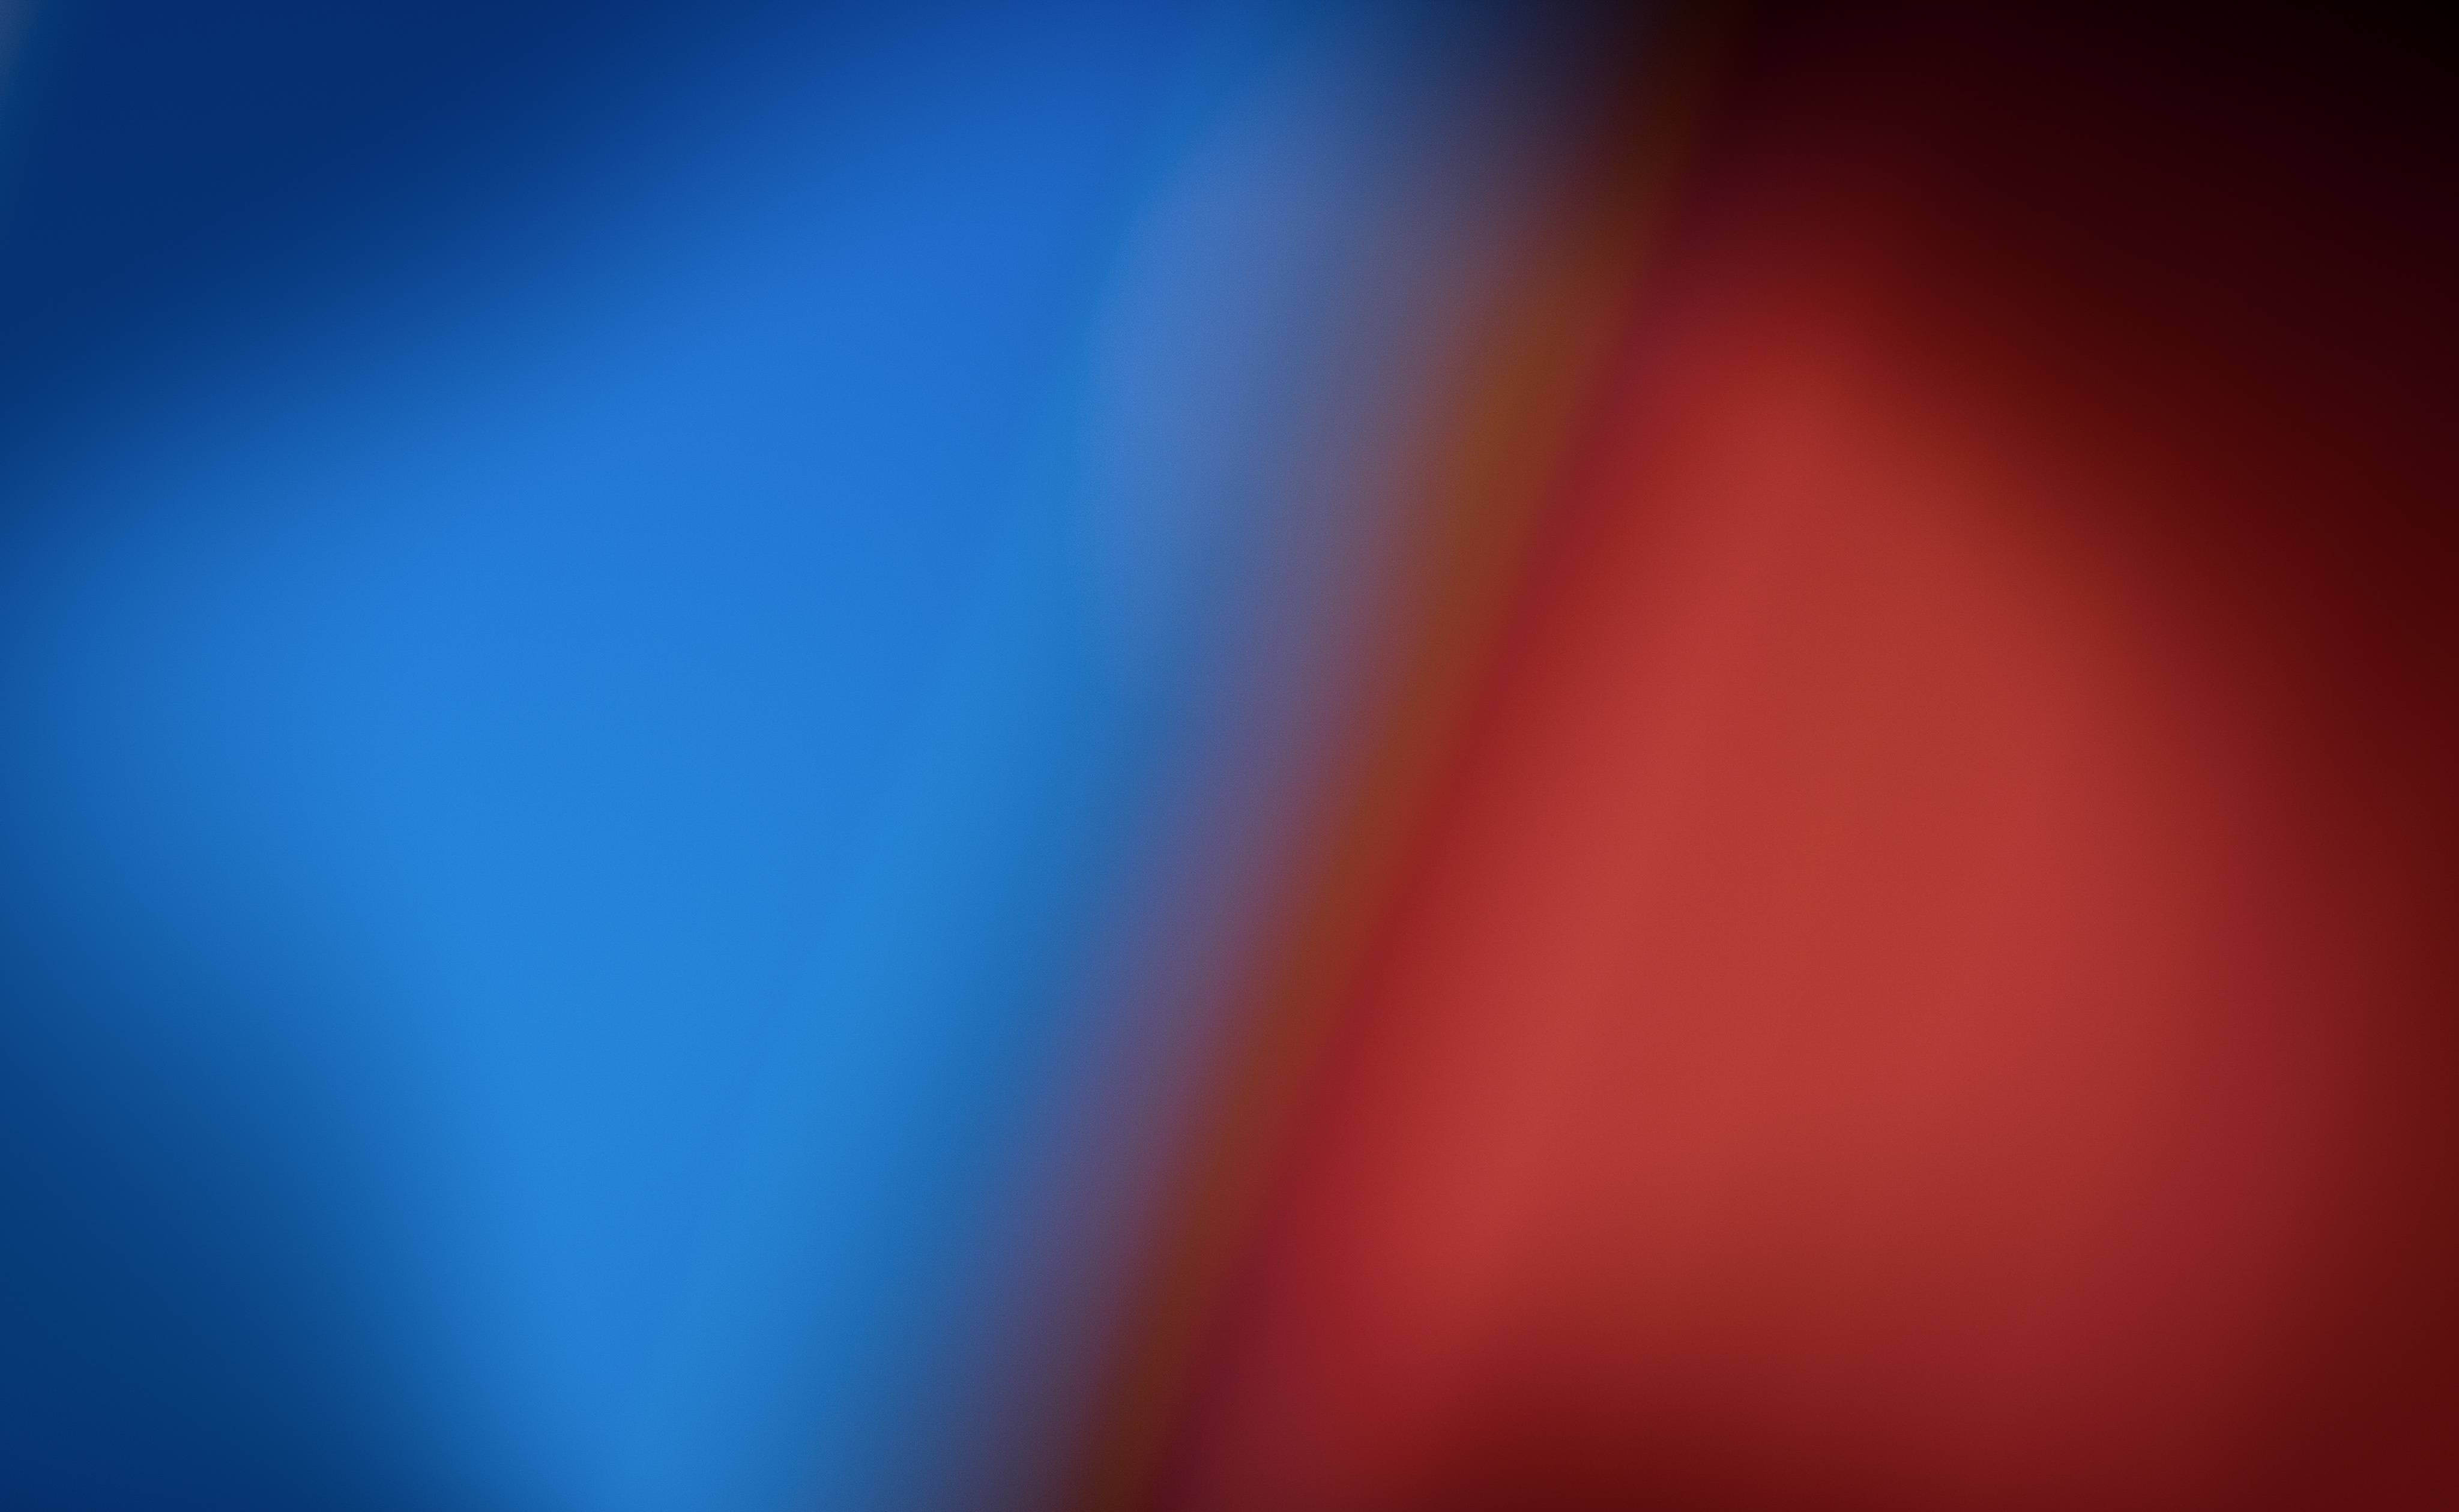 Blue & Red Abstract Background For Free